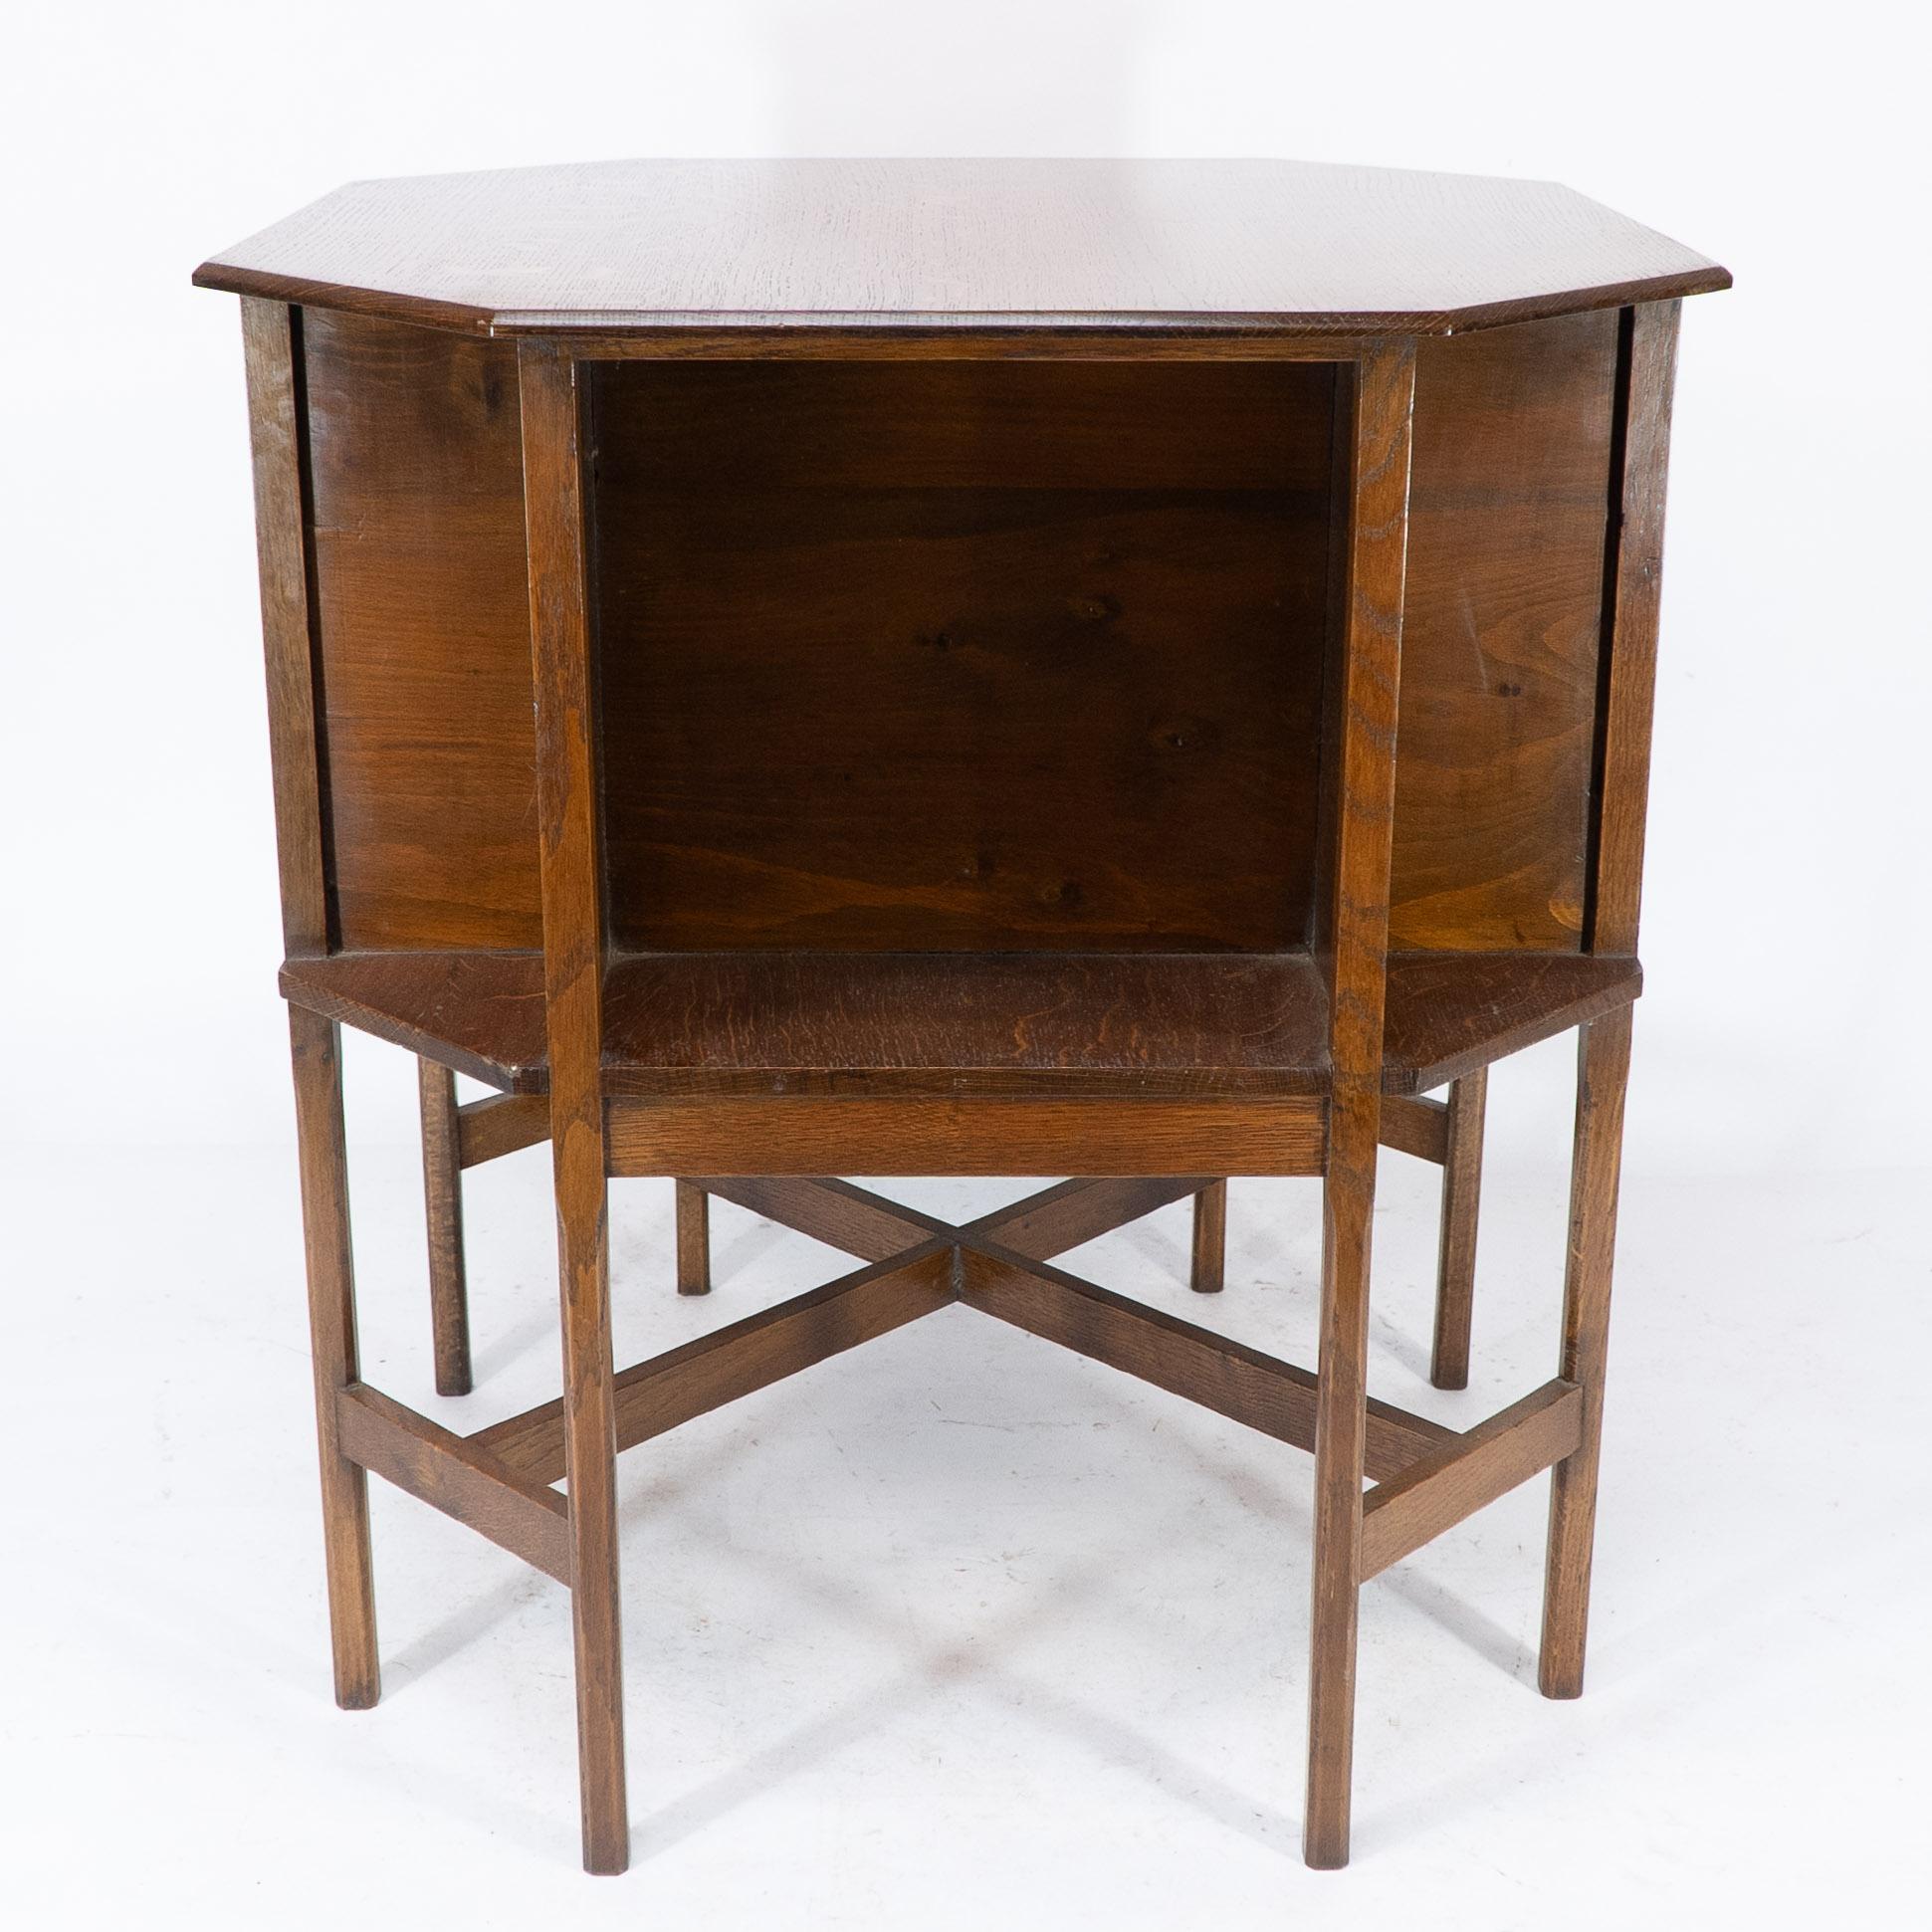 Ambrose Heals attributed.
A well designed Arts and Crafts oak octagonal book/side table with compartments below stood on eight chamfered legs and well executed cross stretcher arrangement ending with precision tenon joints uniting the legs.